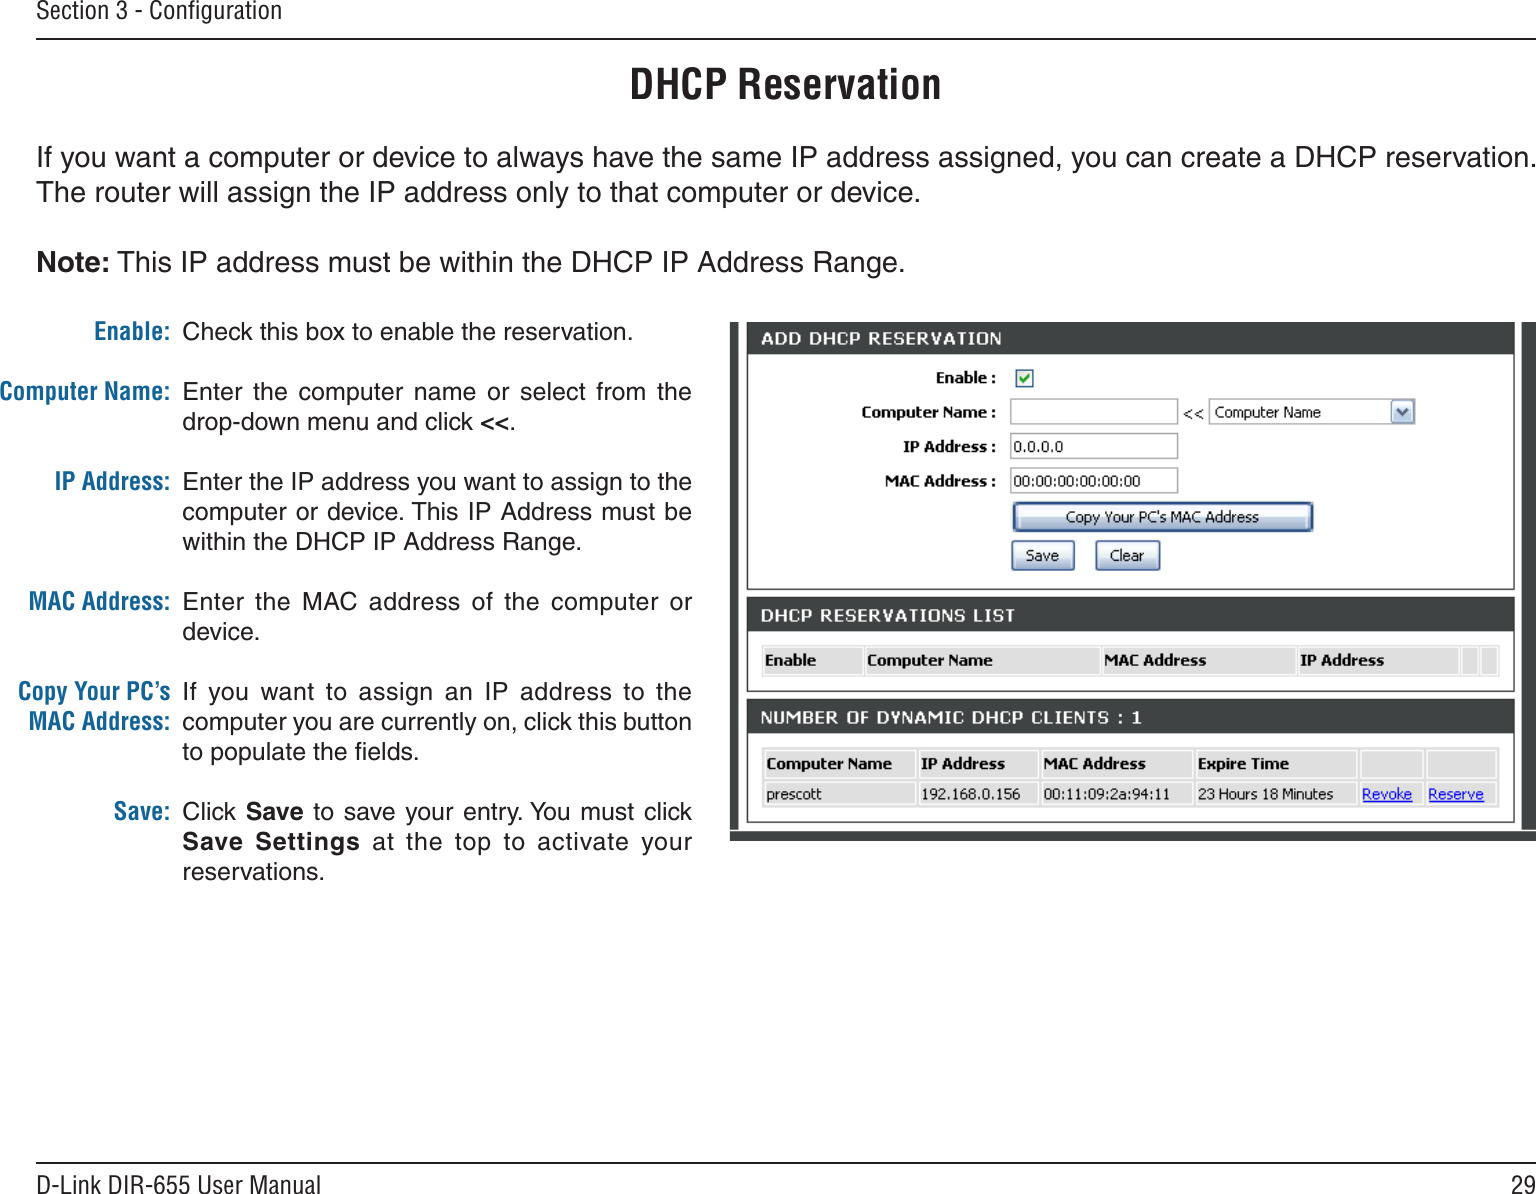 29D-Link DIR-655 User ManualSection 3 - ConﬁgurationDHCP ReservationIf you want a computer or device to always have the same IP address assigned, you can create a DHCP reservation. The router will assign the IP address only to that computer or device. Note: This IP address must be within the DHCP IP Address Range.Check this box to enable the reservation.Enter  the  computer  name  or  select  from  the drop-down menu and click &lt;&lt;.Enter the IP address you want to assign to the computer or device. This IP Address must be within the DHCP IP Address Range.Enter  the  MAC address  of  the  computer  or device.If  you  want  to  assign  an  IP  address  to  the computer you are currently on, click this button to populate the ﬁelds. Click Save  to save your entry. You must click Save  Settings  at  the  top  to  activate  your reservations. Enable:Computer Name:IP Address:MAC Address:Copy Your PC’s MAC Address:Save: